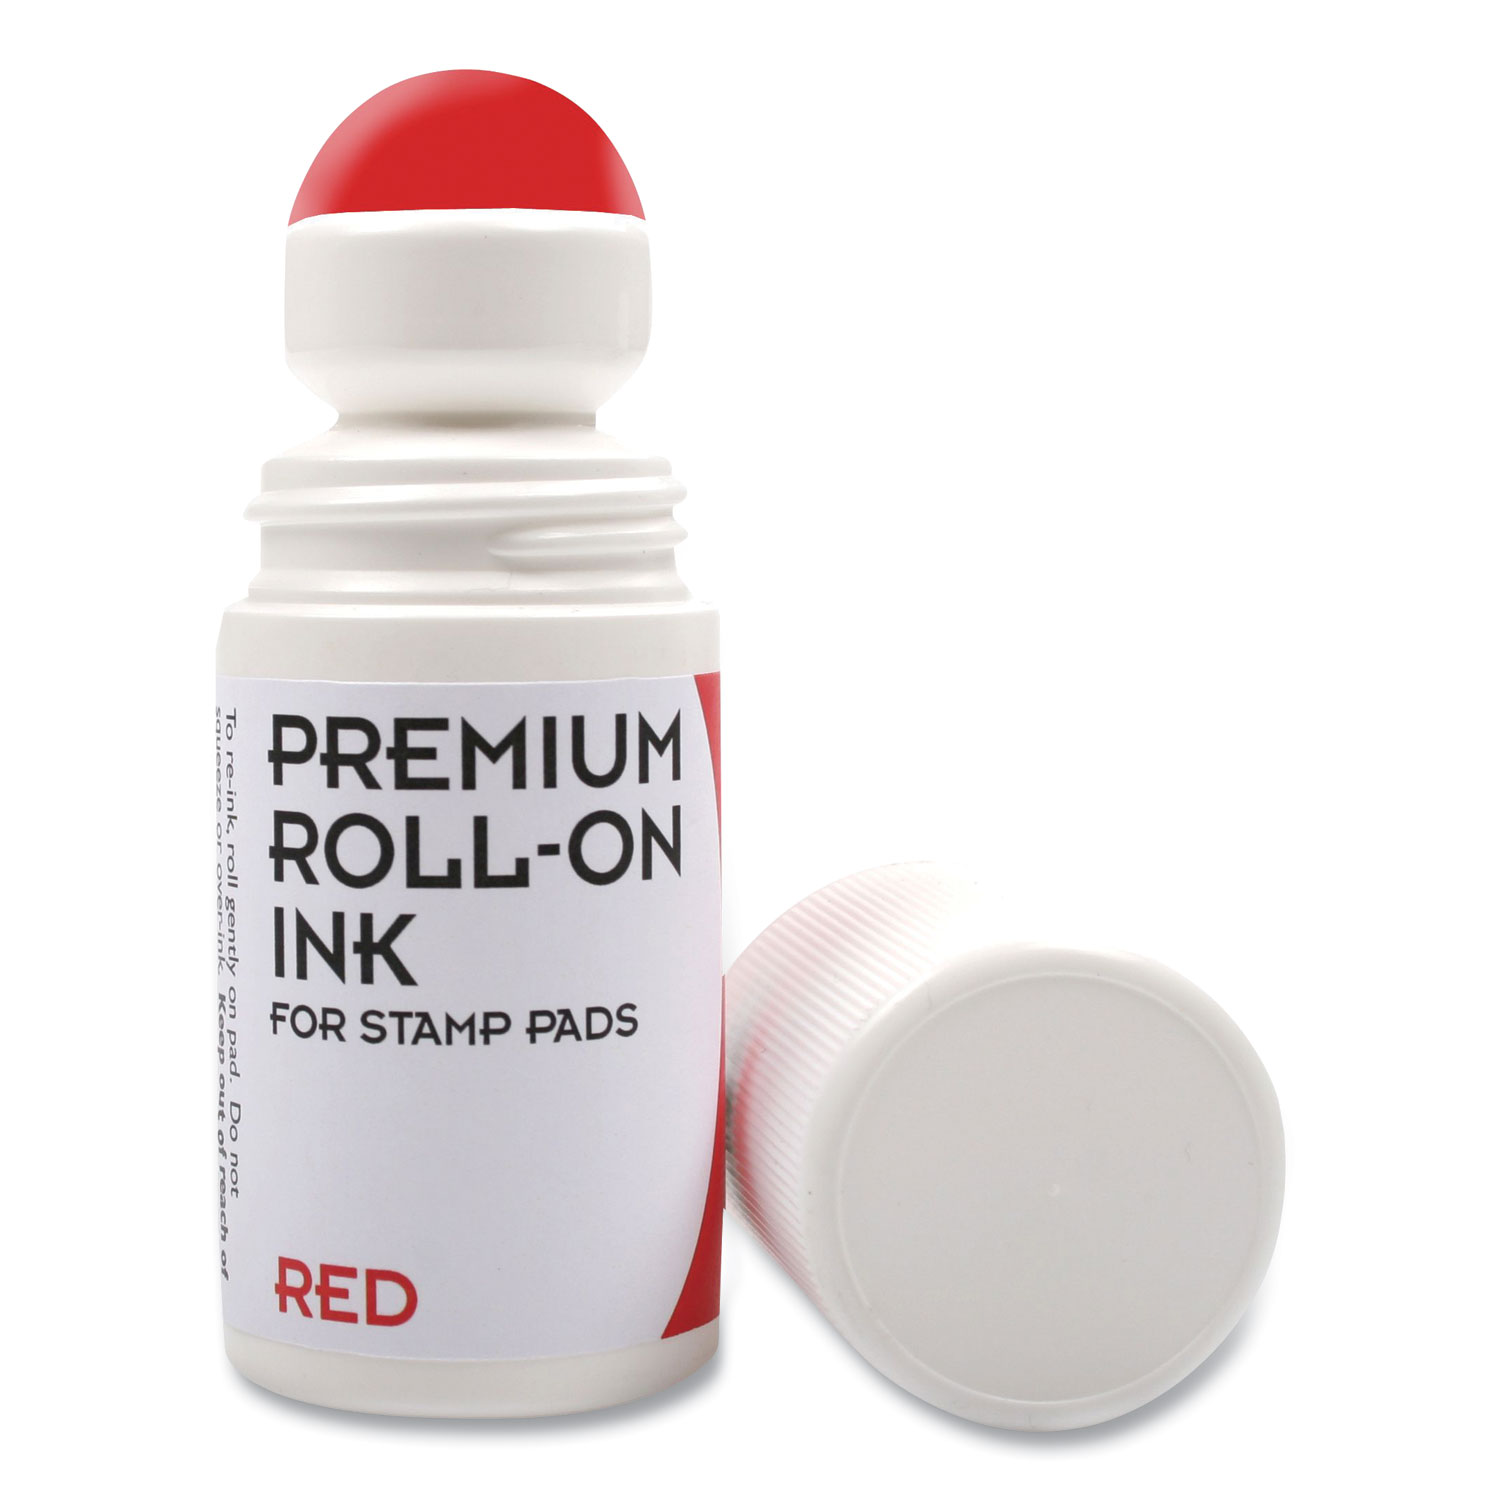  COSCO 030260 Premium Roll-On Ink, 2 oz, Red (CSC819372) 